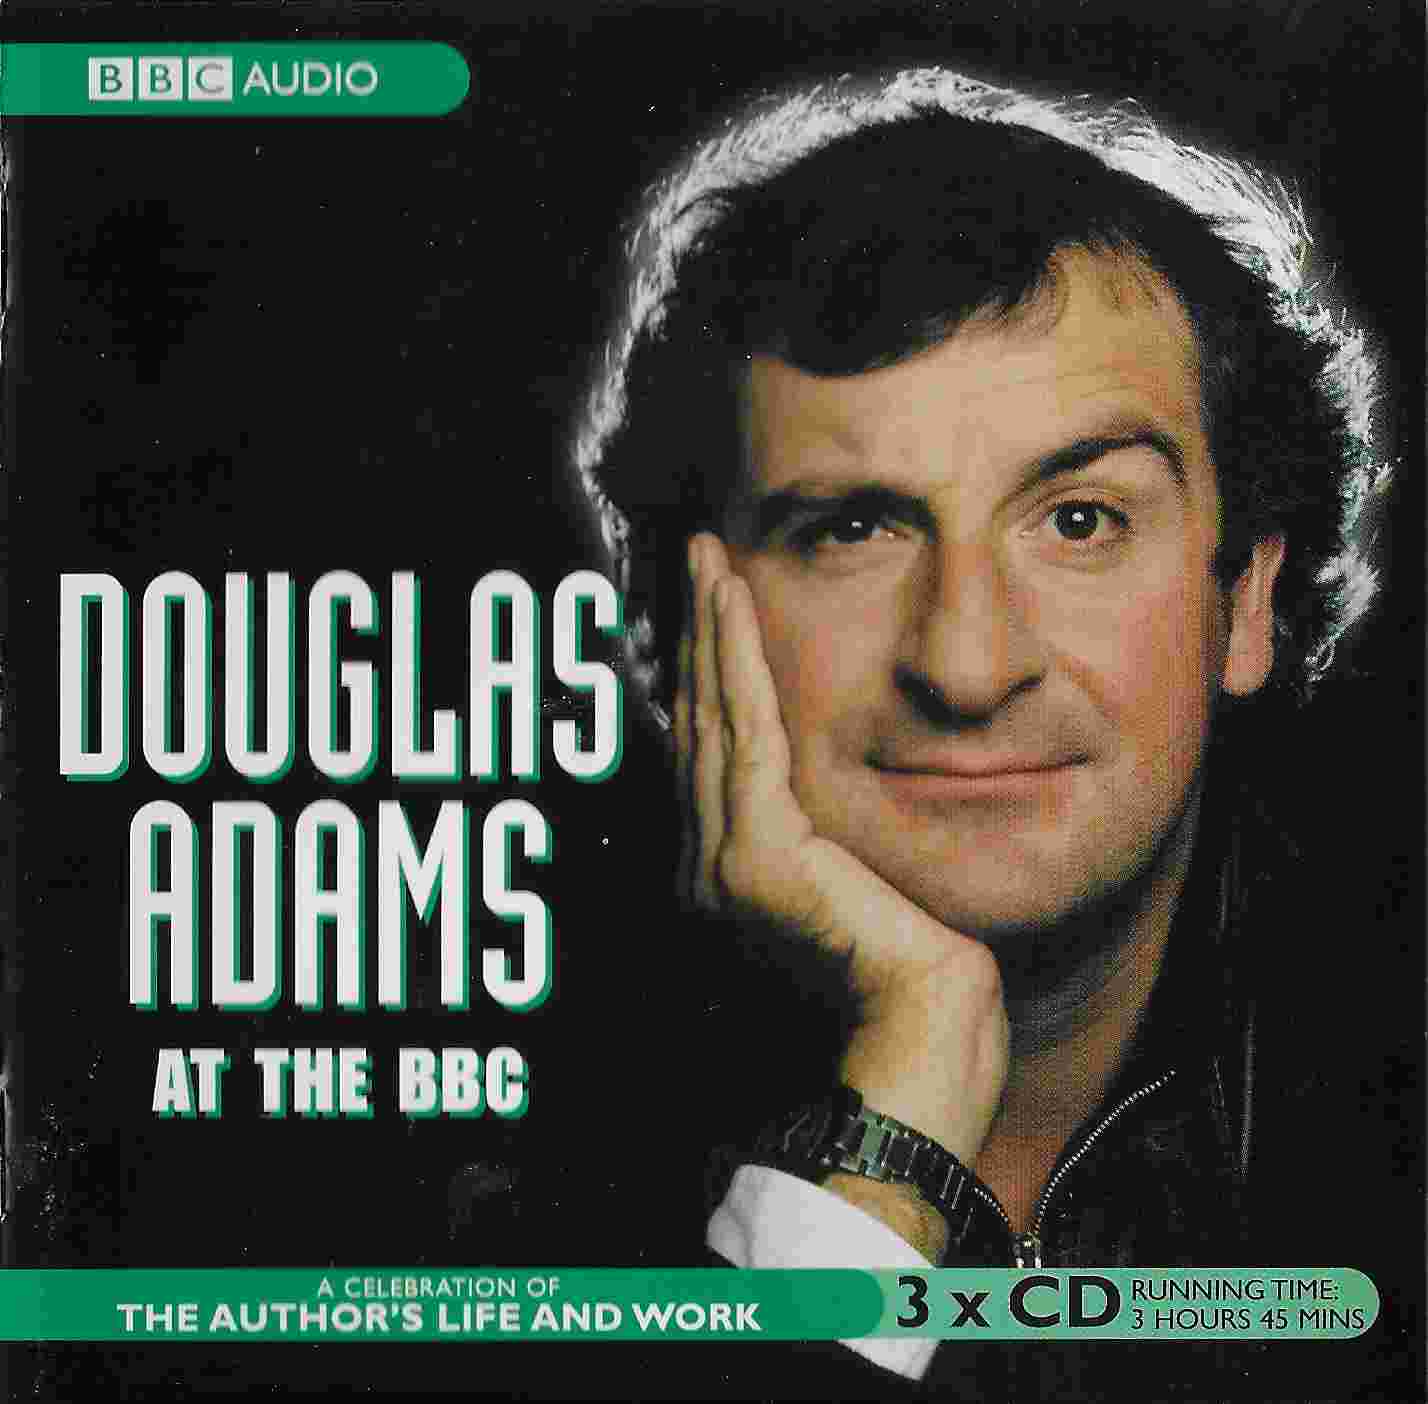 Picture of ISBN 0-563-49404-2 Douglas Adams at the BBC by artist Various from the BBC cds - Records and Tapes library